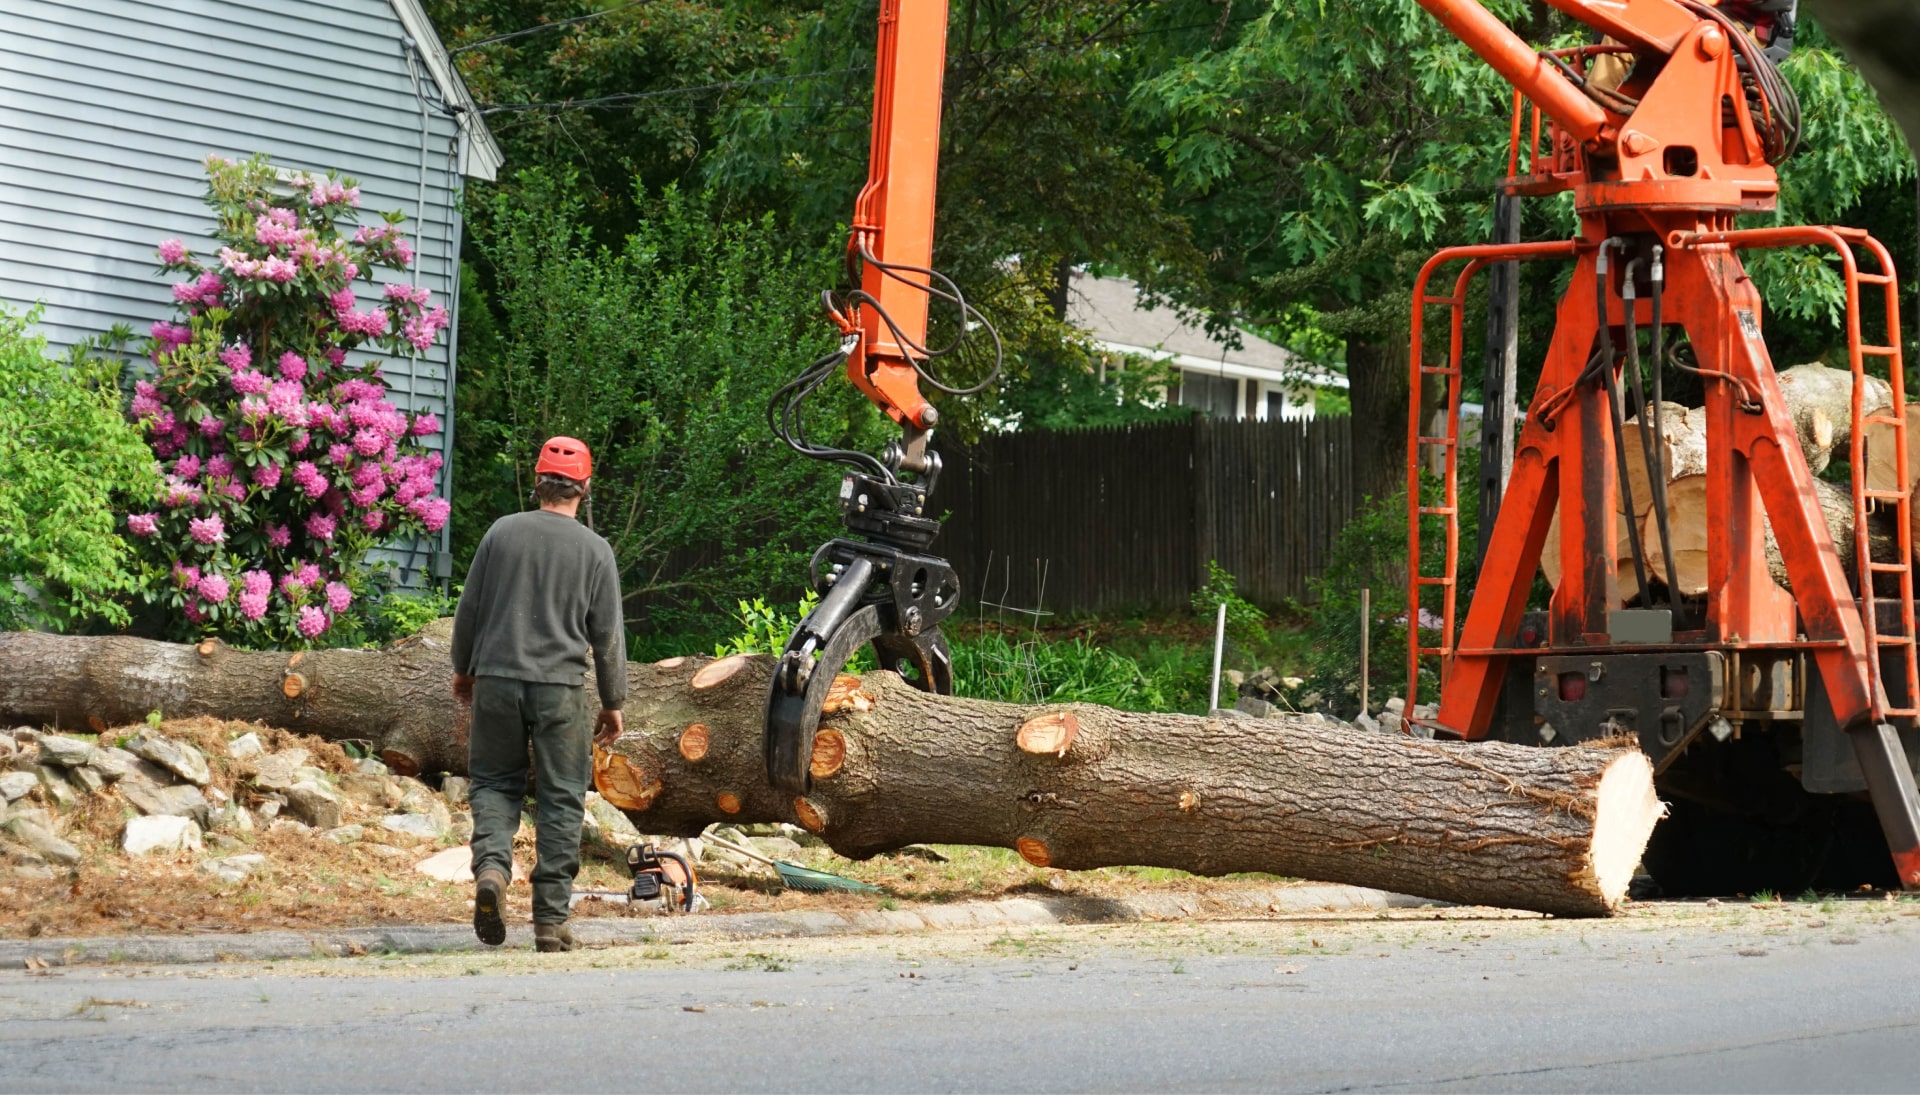 Local partner for Tree removal services in Fairfax